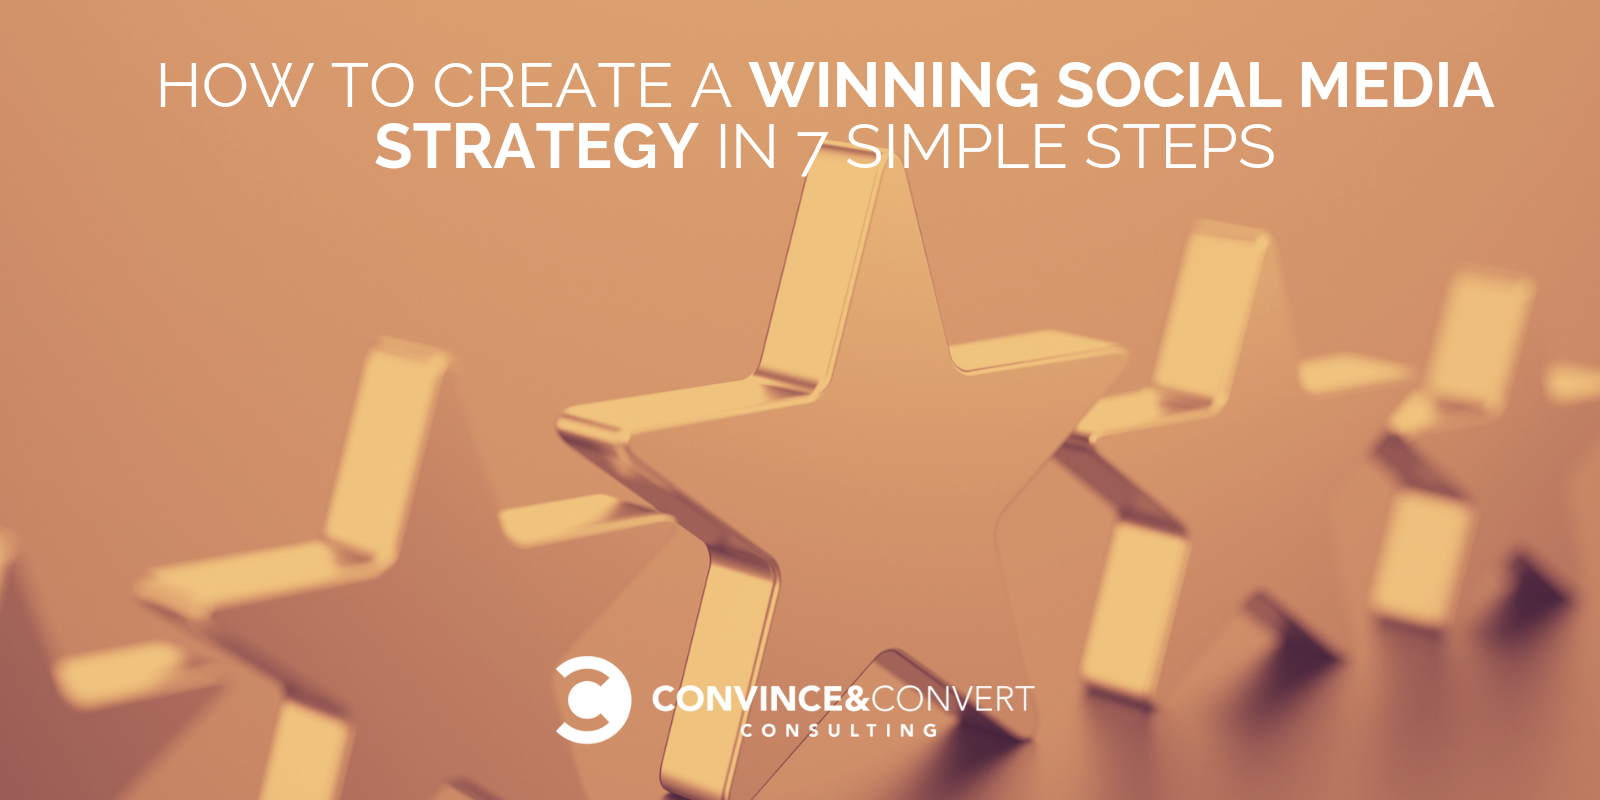 How to Create a Winning Social Media Strategy in 7 Simple Steps